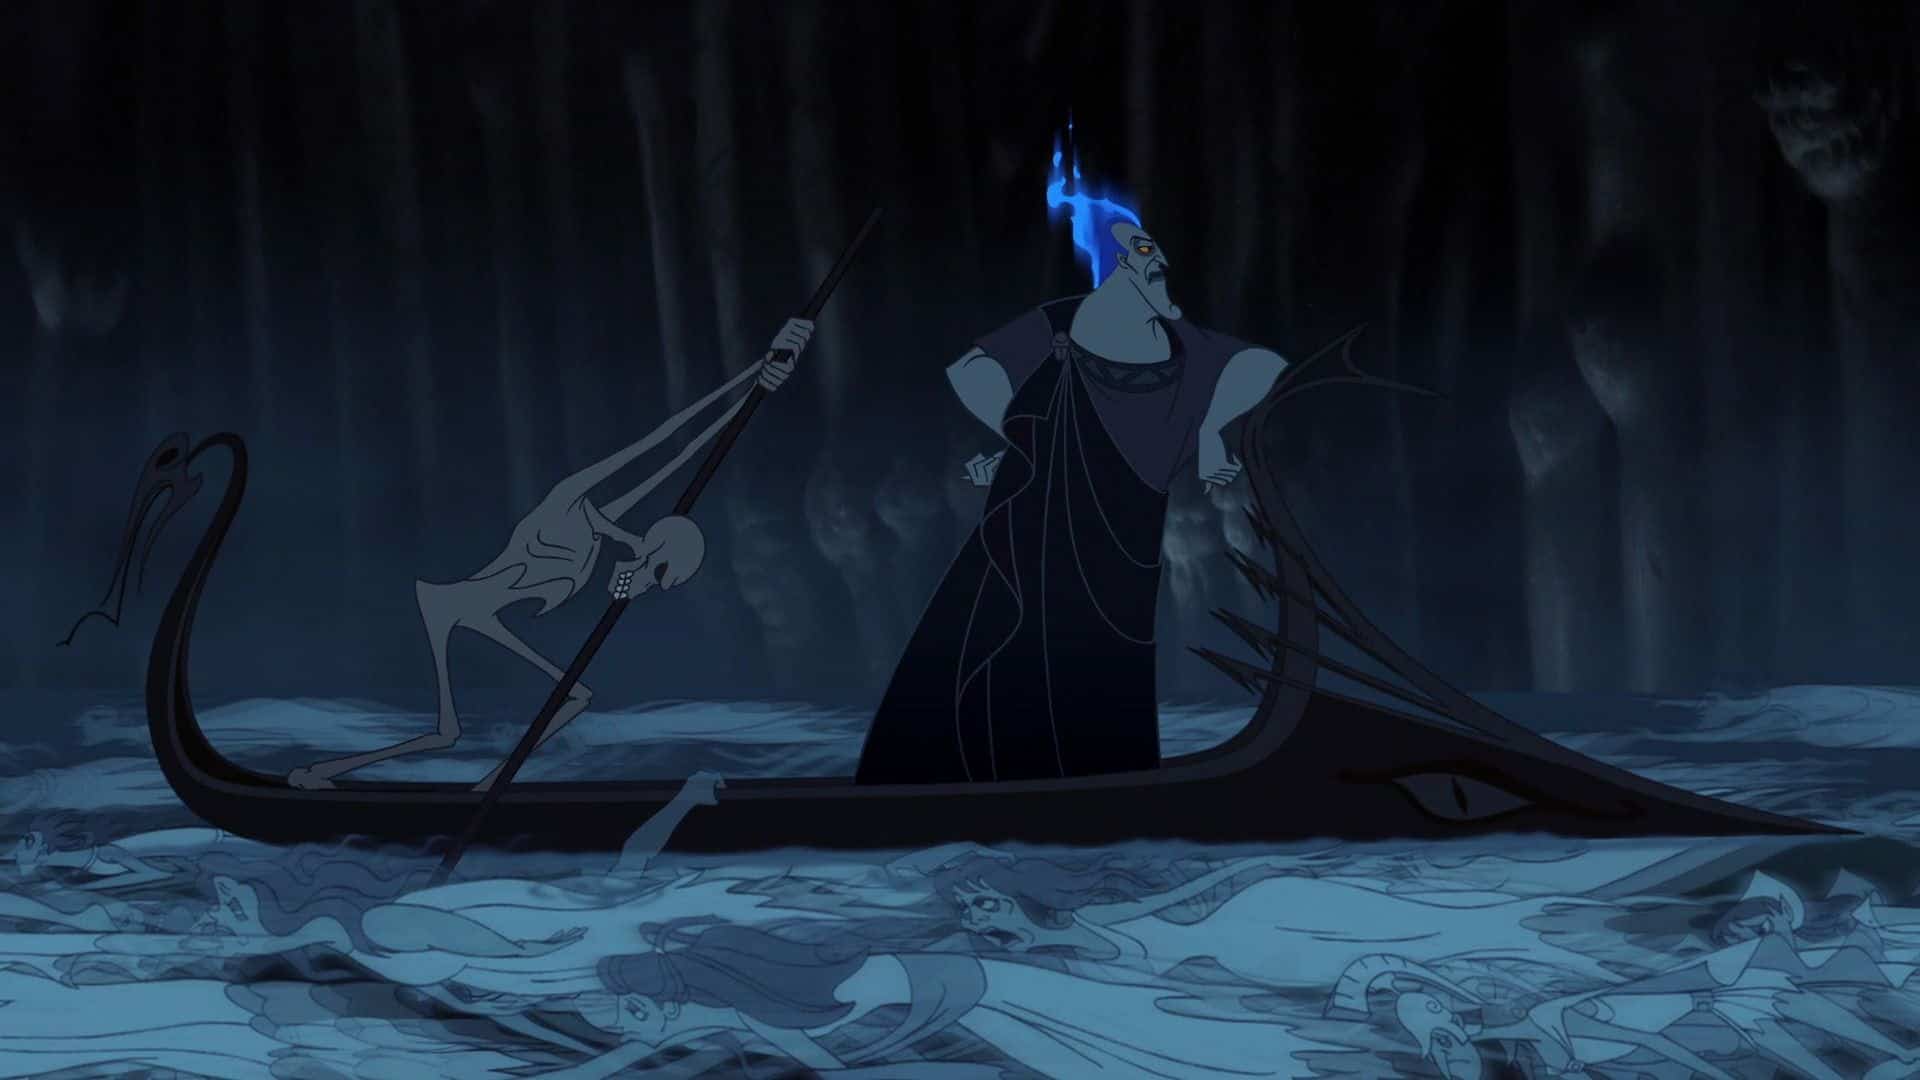 Hades on the boat